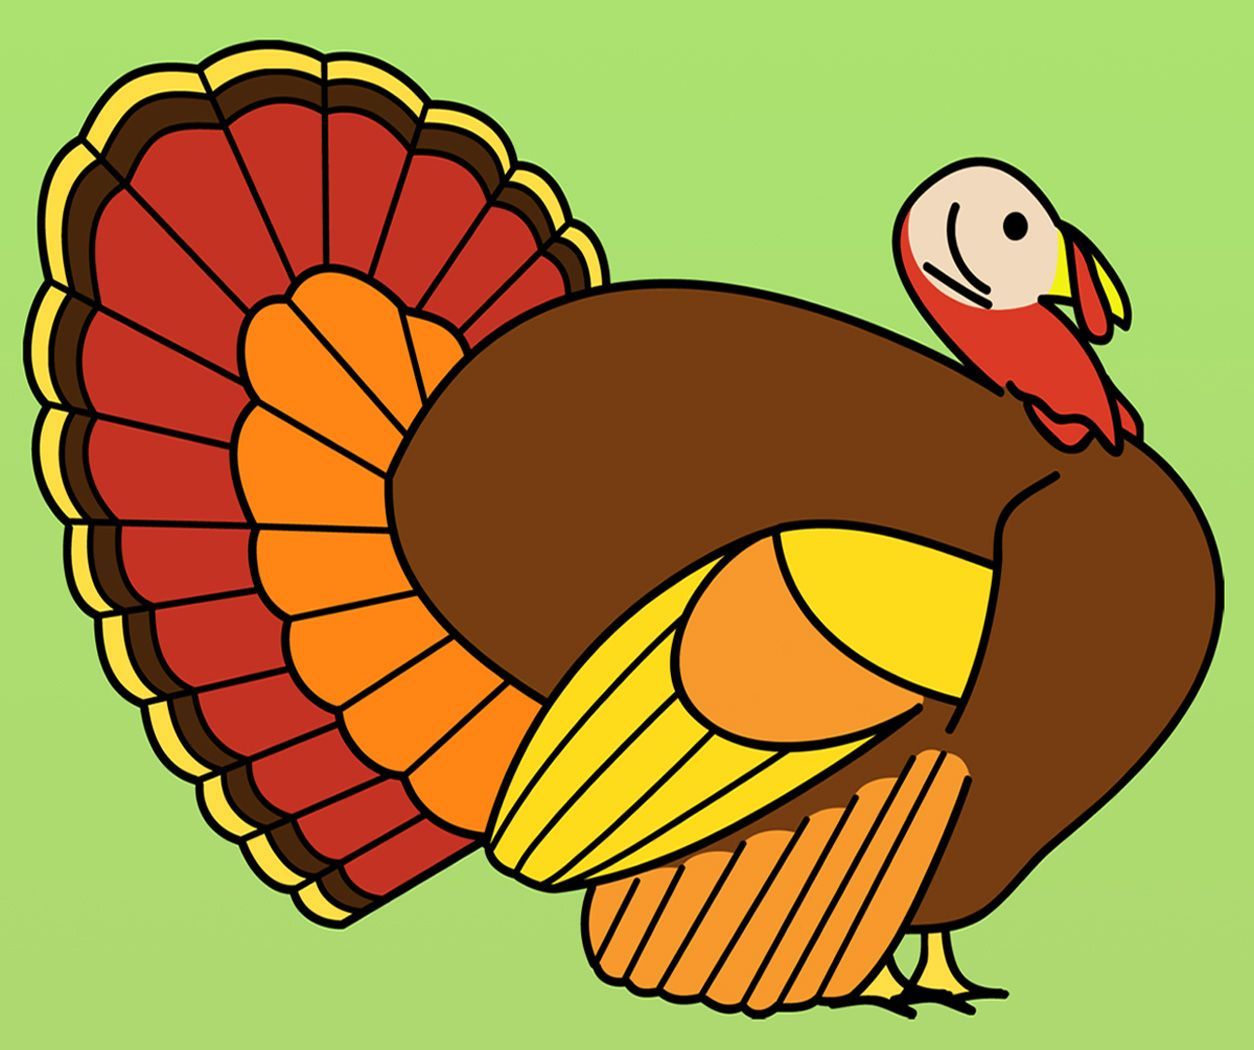 Happy thanksgiving turkey images, pictures and wallpapers for